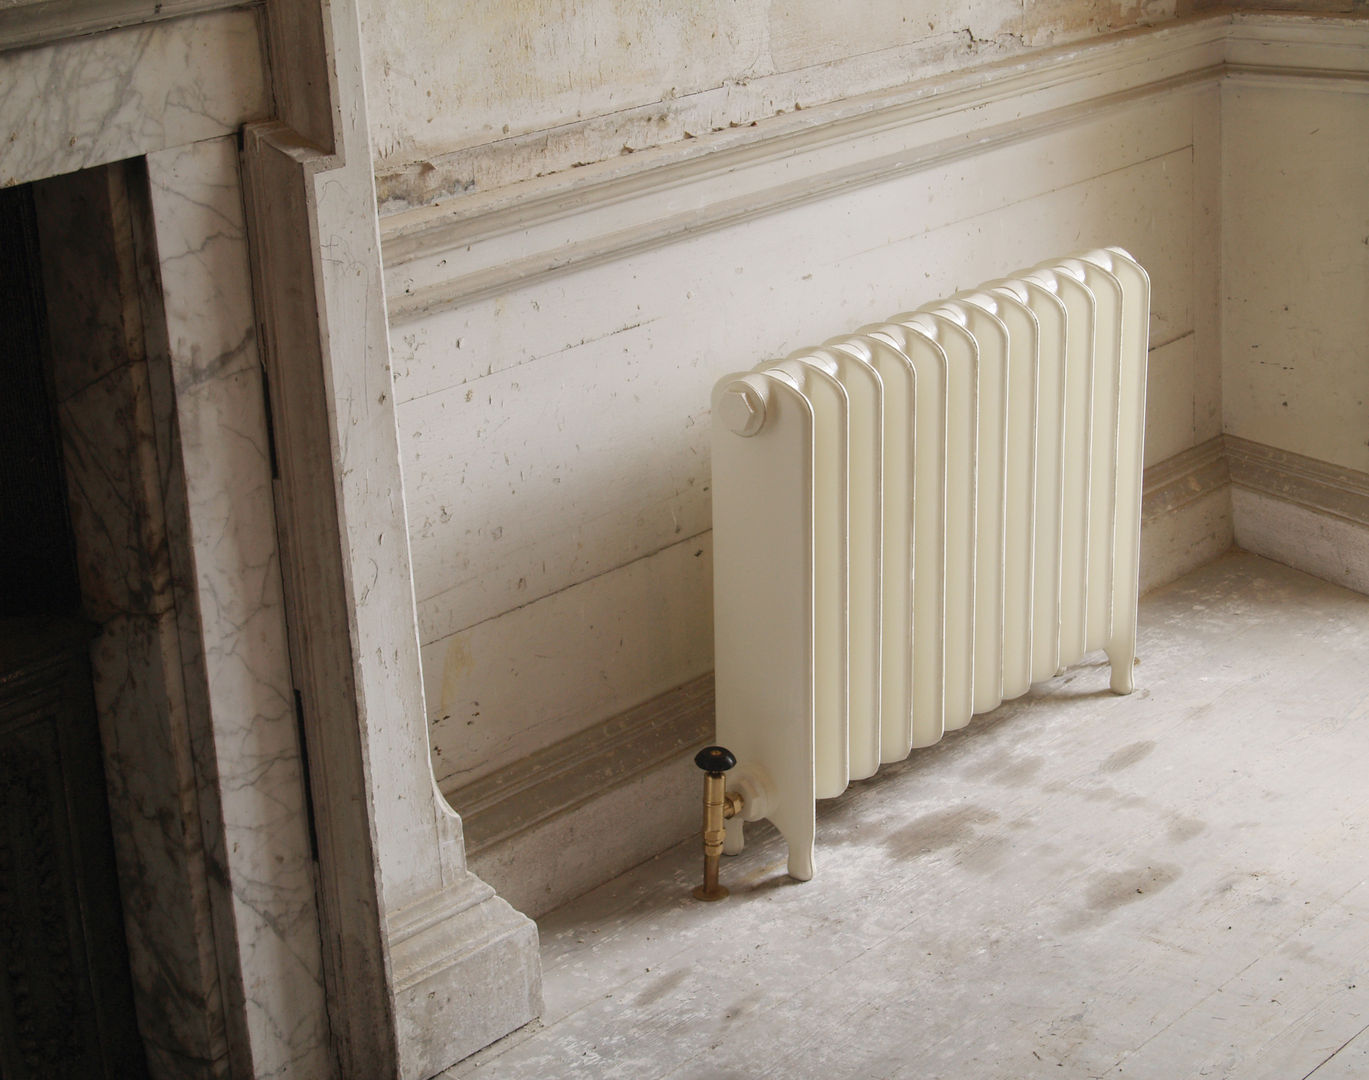 The Eton Cast Iron Radiator is available from UKAA UKAA | UK Architectural Antiques Bathroom Fittings